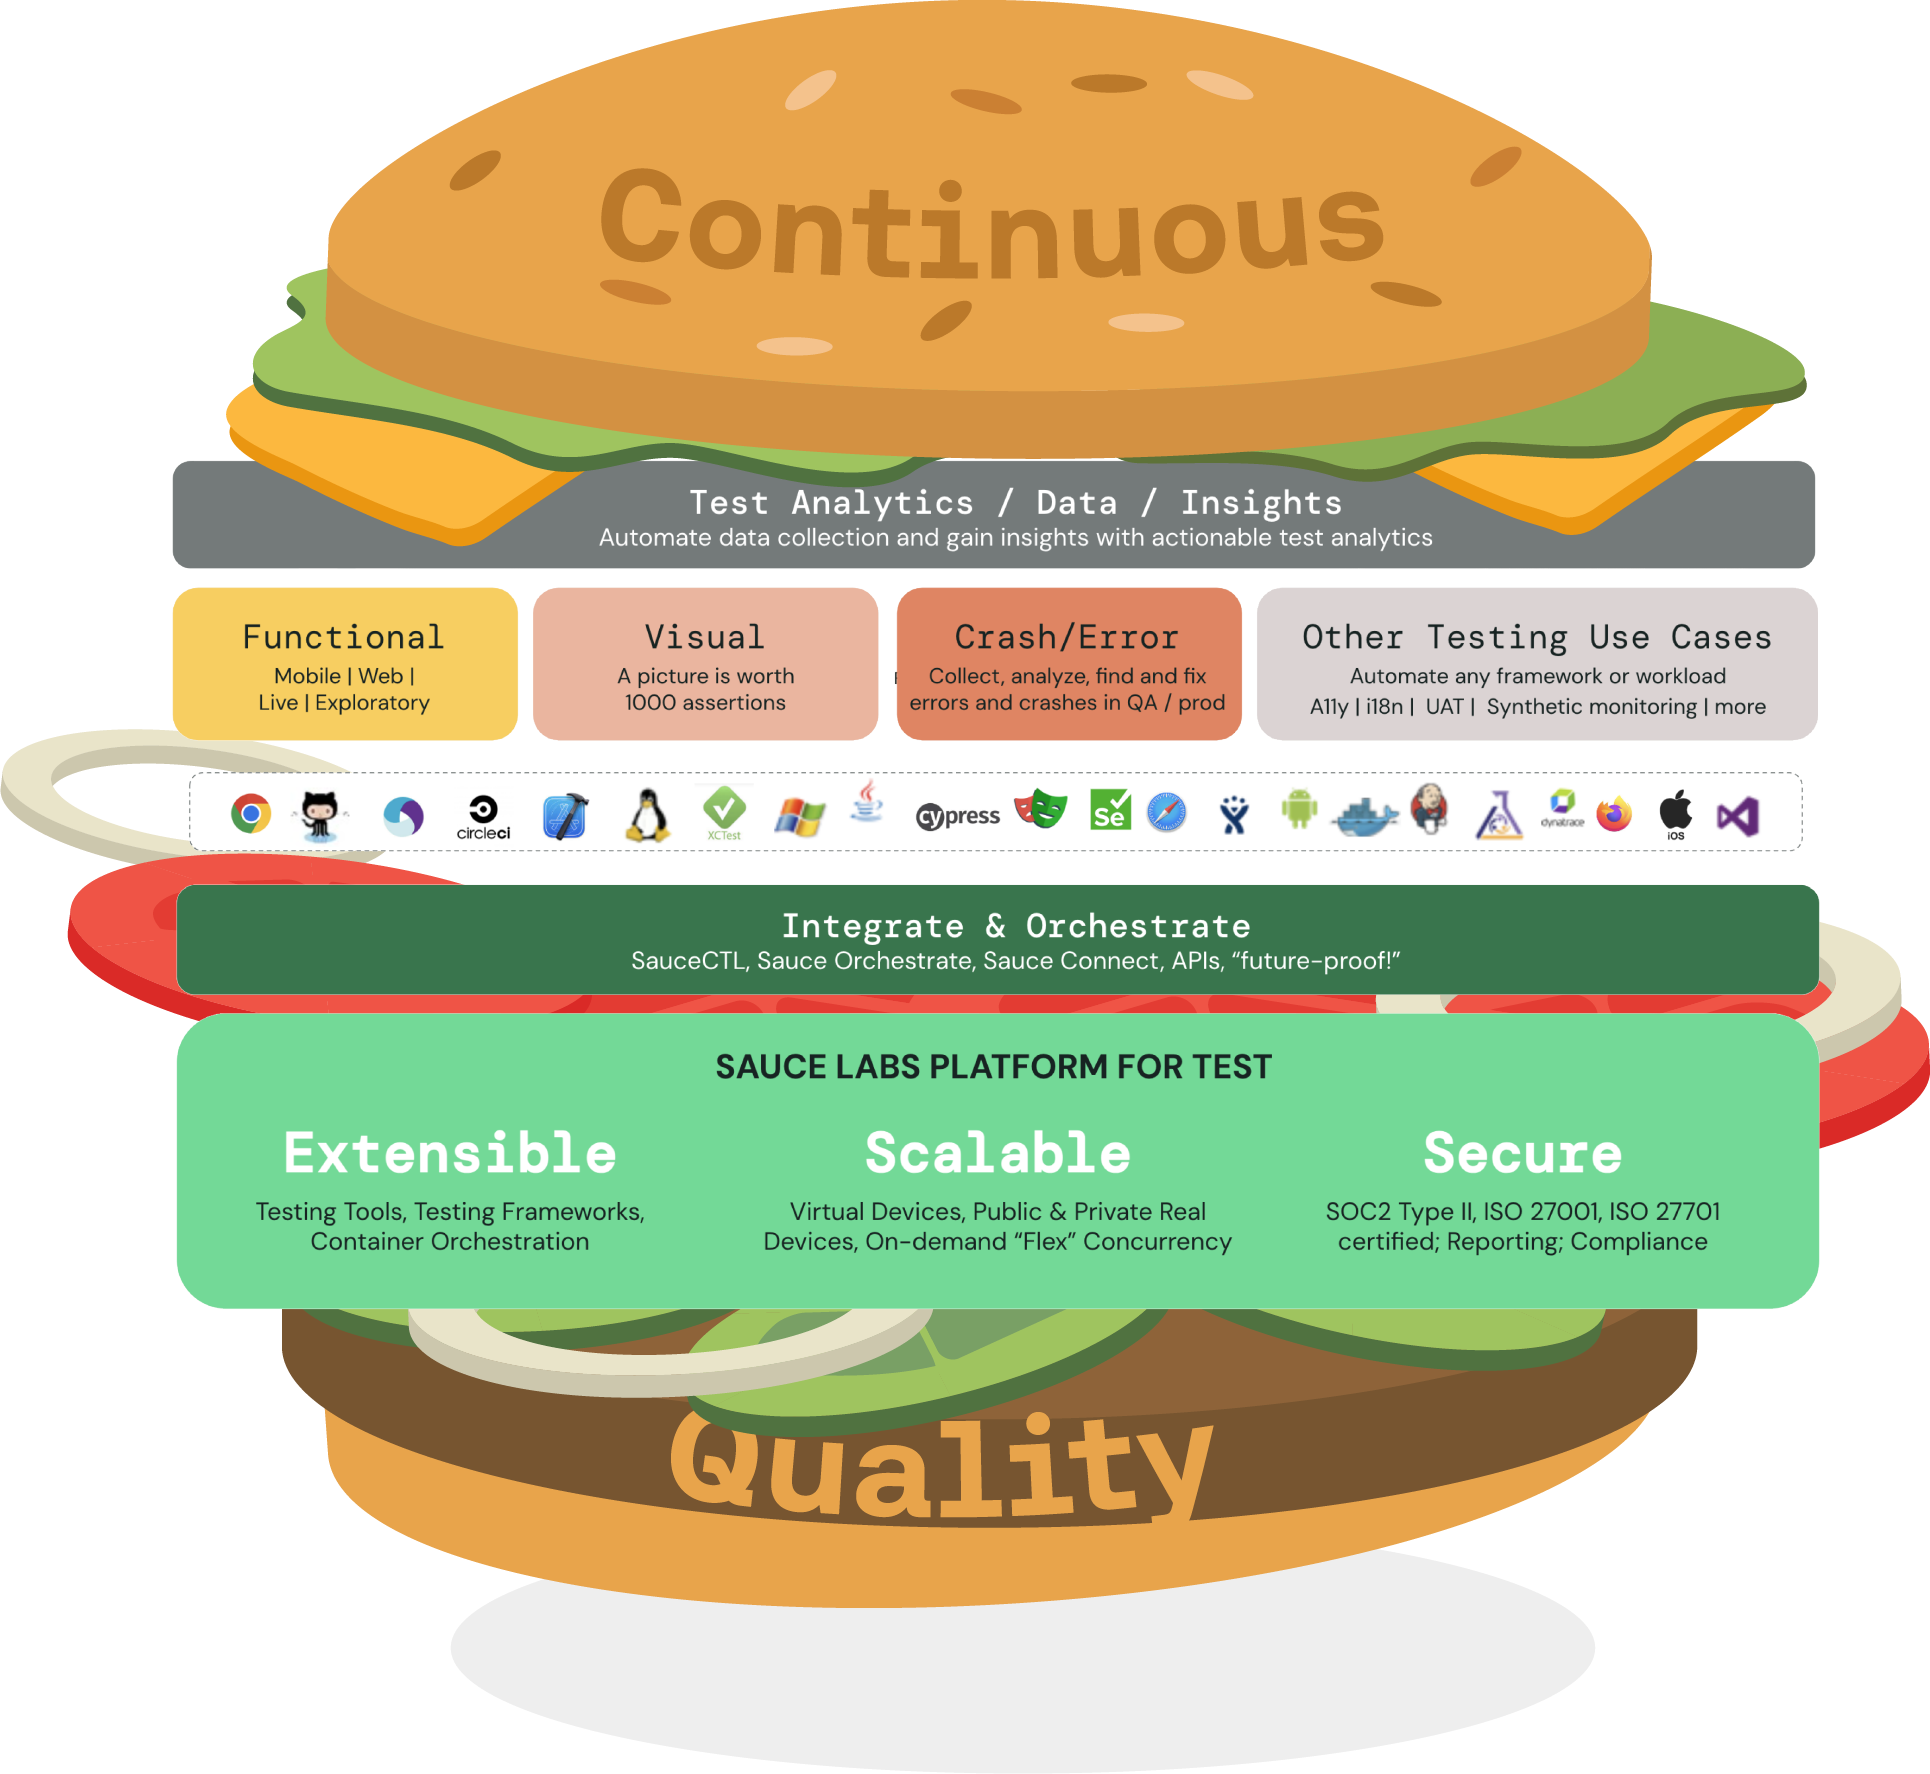 Illustrating how Sauce Lab's Platform for Test creating Continuous Quality 